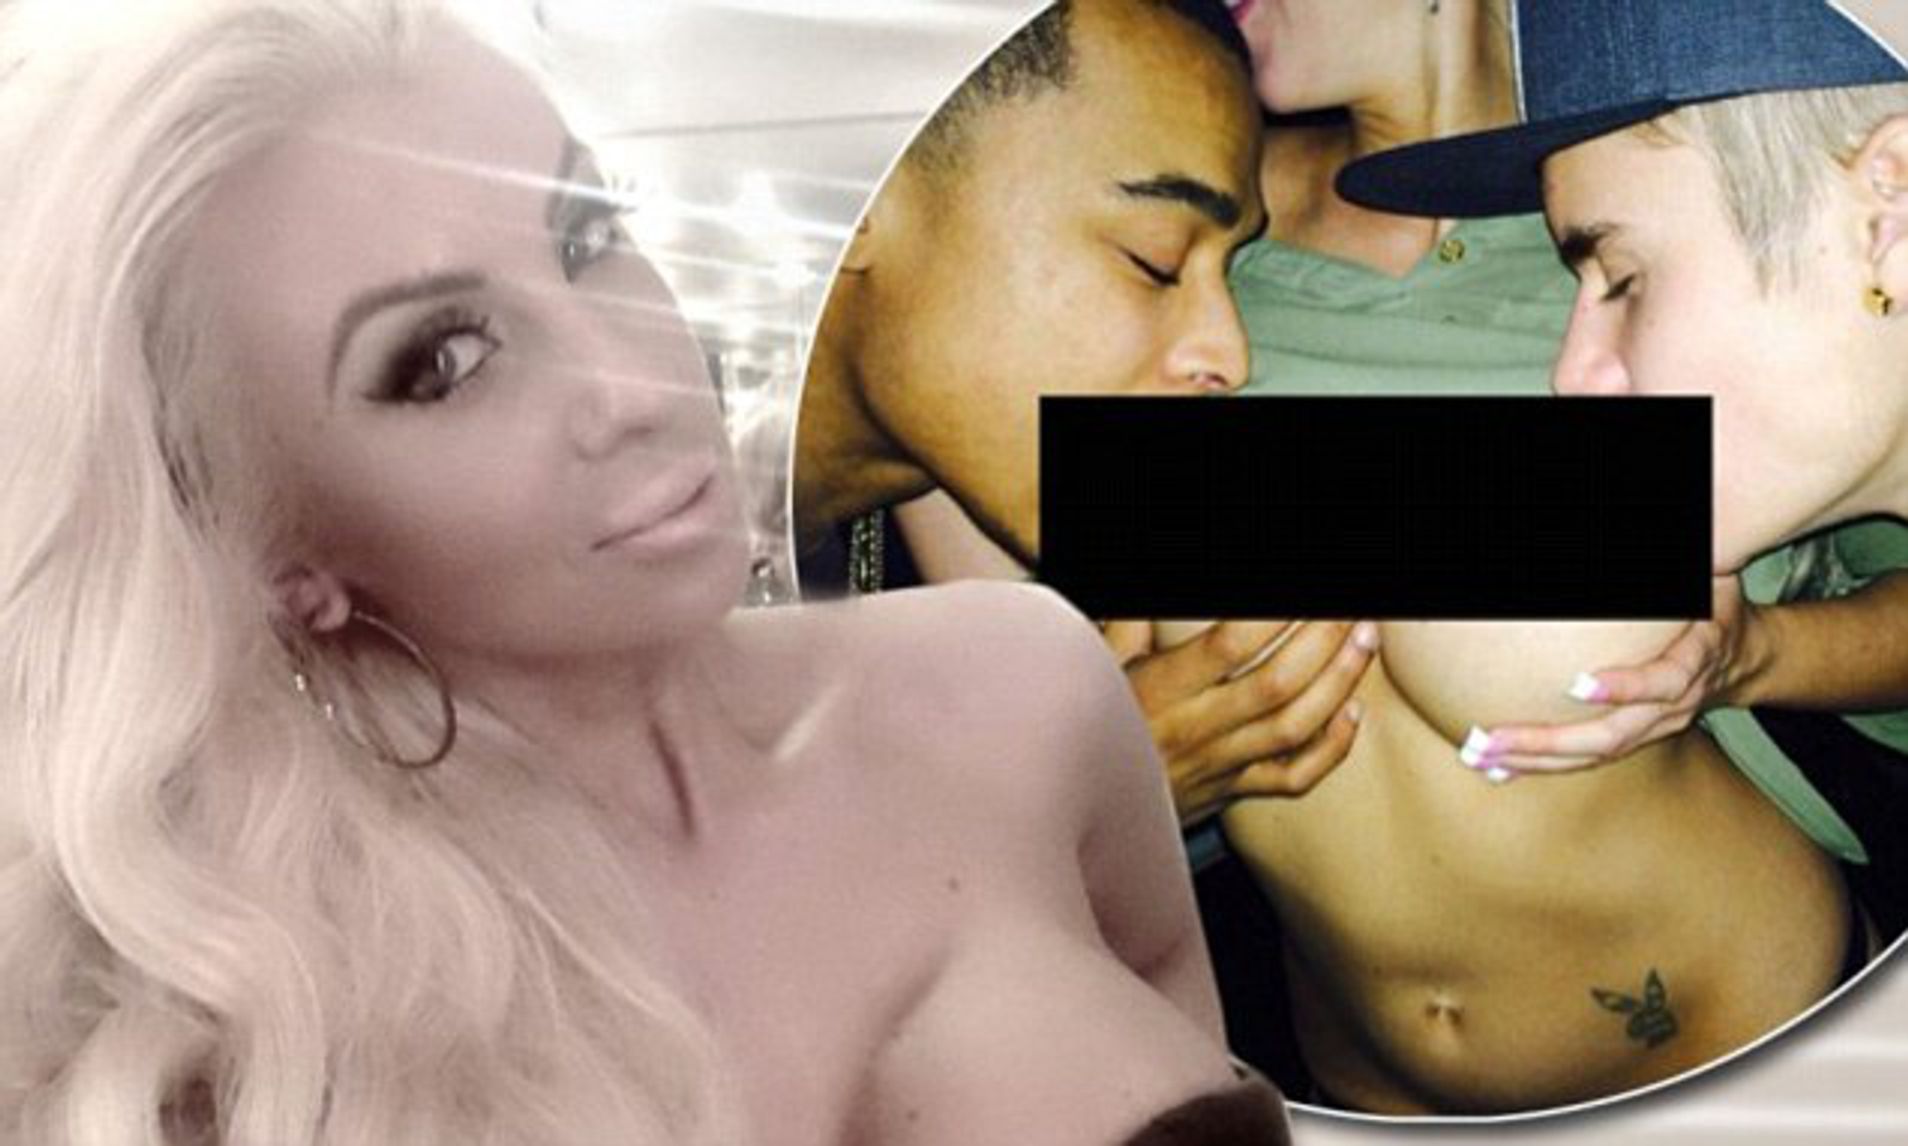 britney boykins recommends justin bieber biting nipple pic